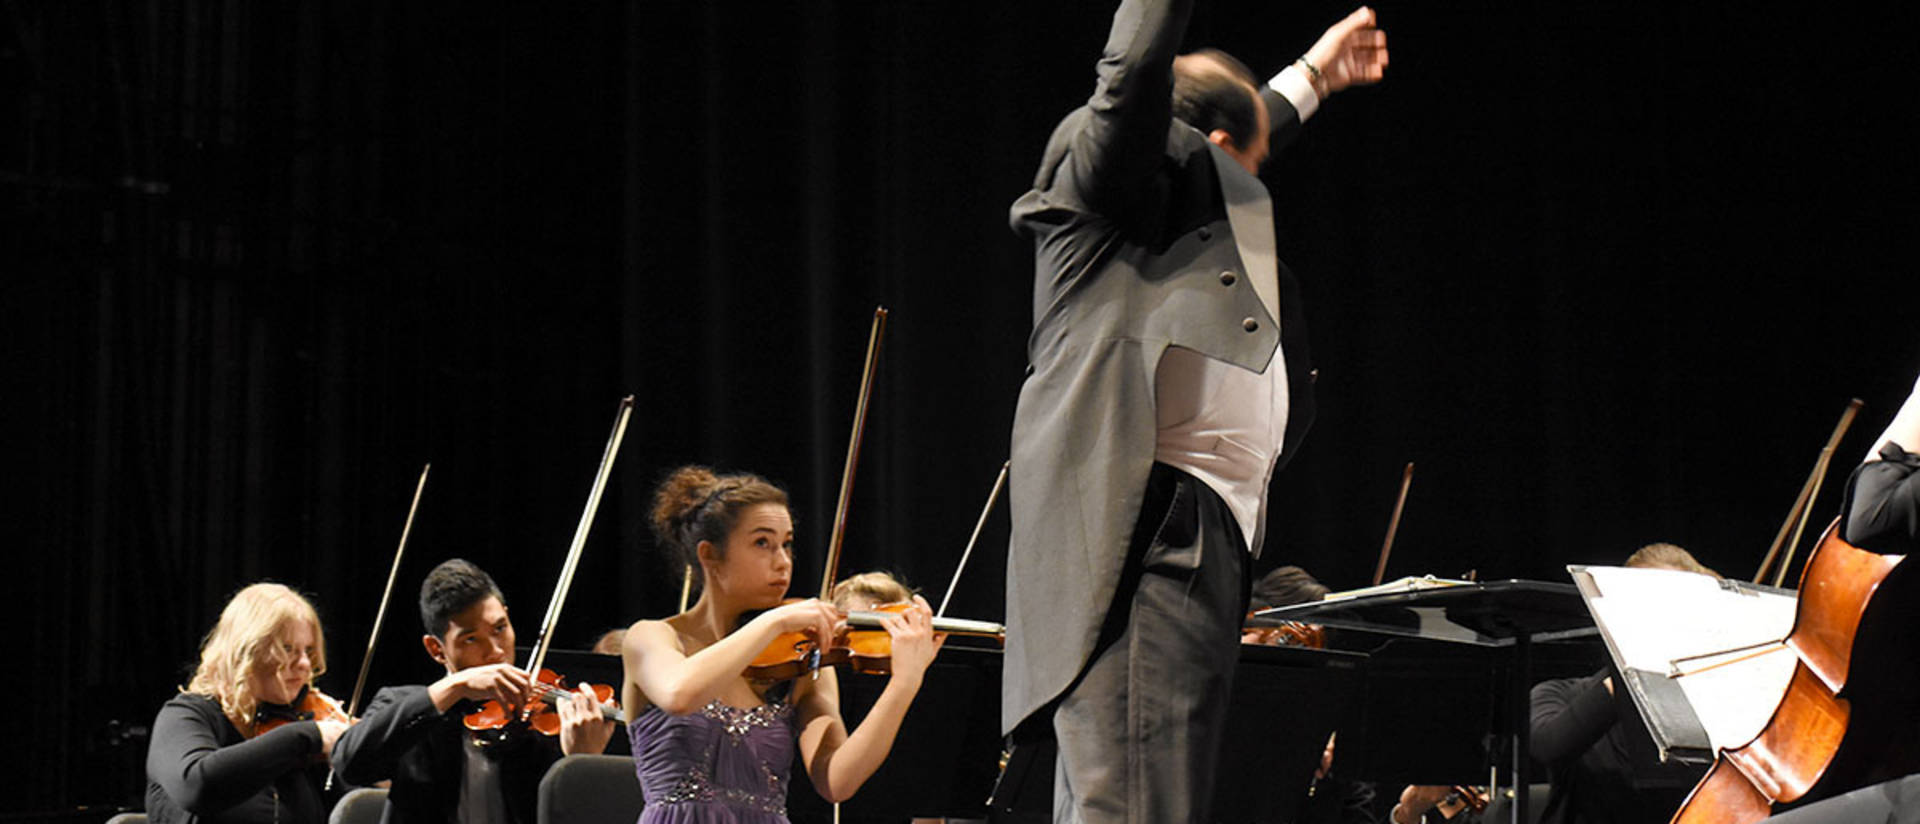 Anne Schreiber, violin, and student conductor Carlos Rojo